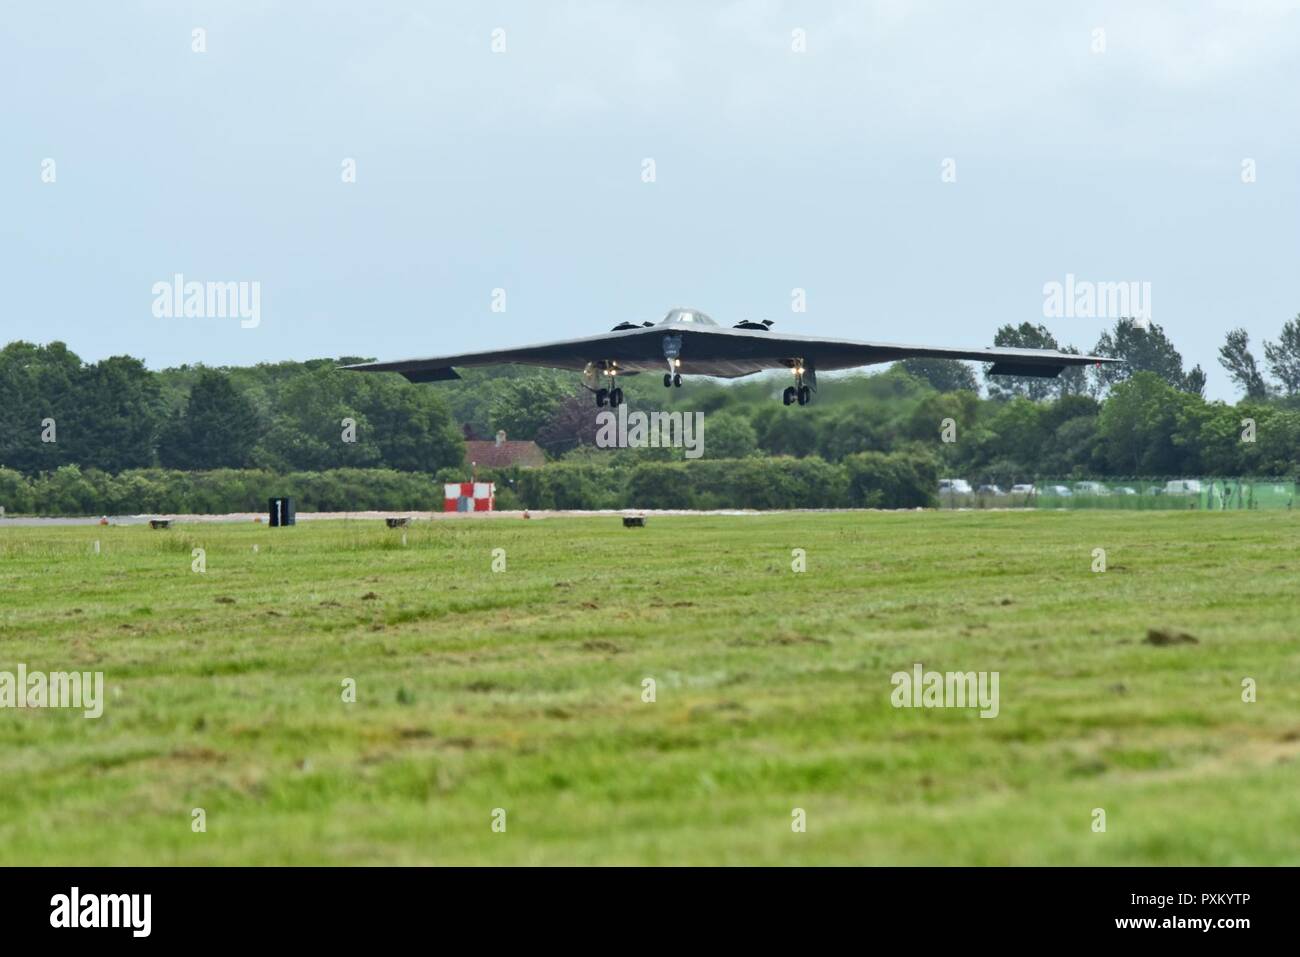 A B-2 Spirit deployed from Whiteman Air Force Base, Mo., approaches the runway at RAF Fairford, U.K., June 9, 2017. The B-2 routinely conducts bomber assurance and deterrence missions providing a flexible and vigilant long-range global strike capability, and is just one demonstration of the U.S. commitment to supporting global security. Stock Photo